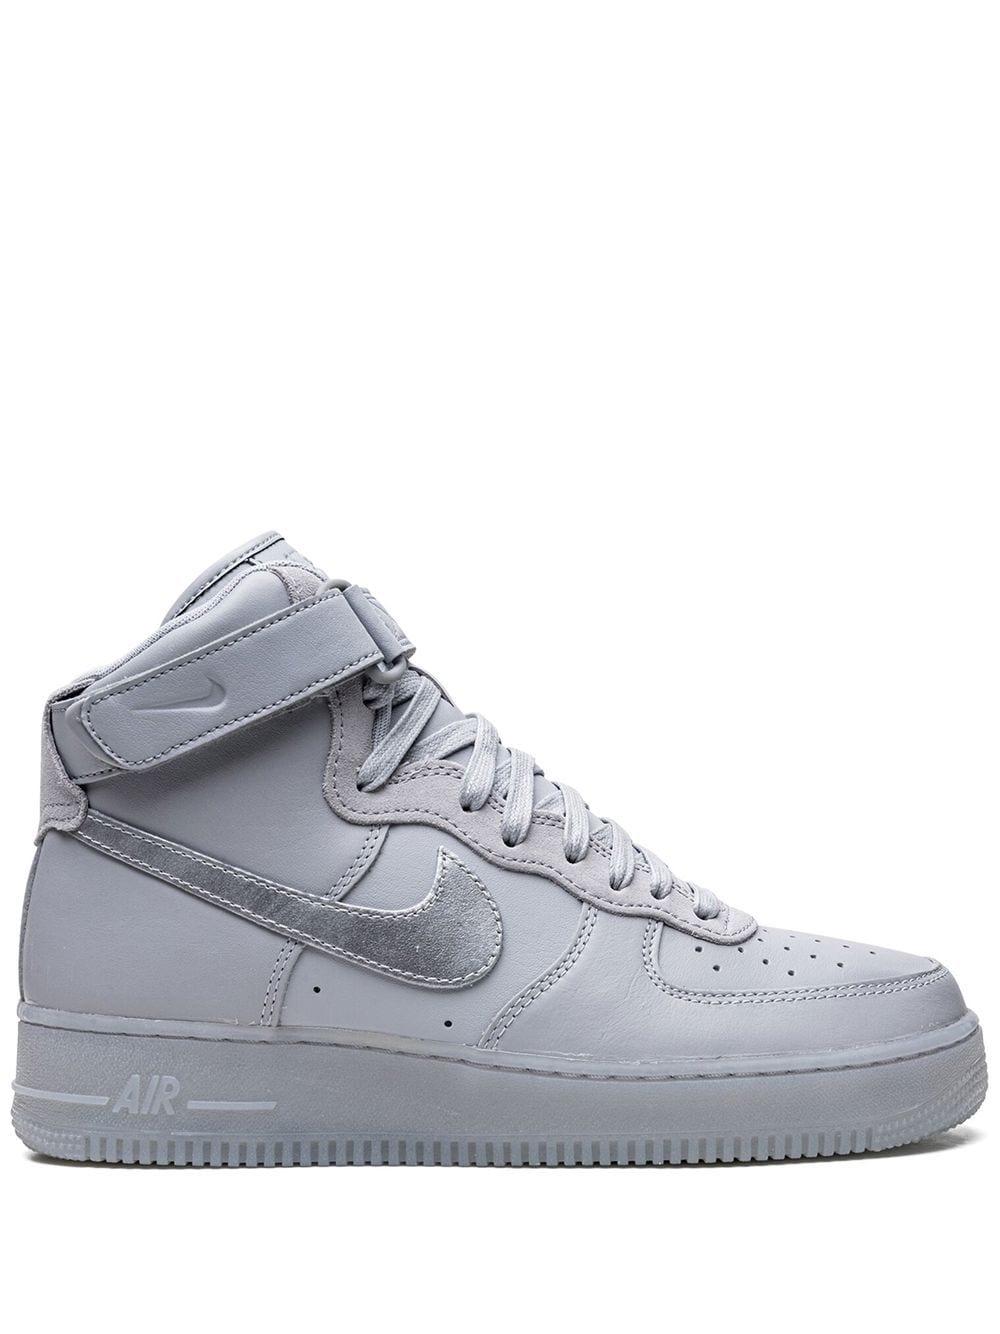 Nike Air Force 1 High "grey Volt" Sneakers in Gray for Men | Lyst